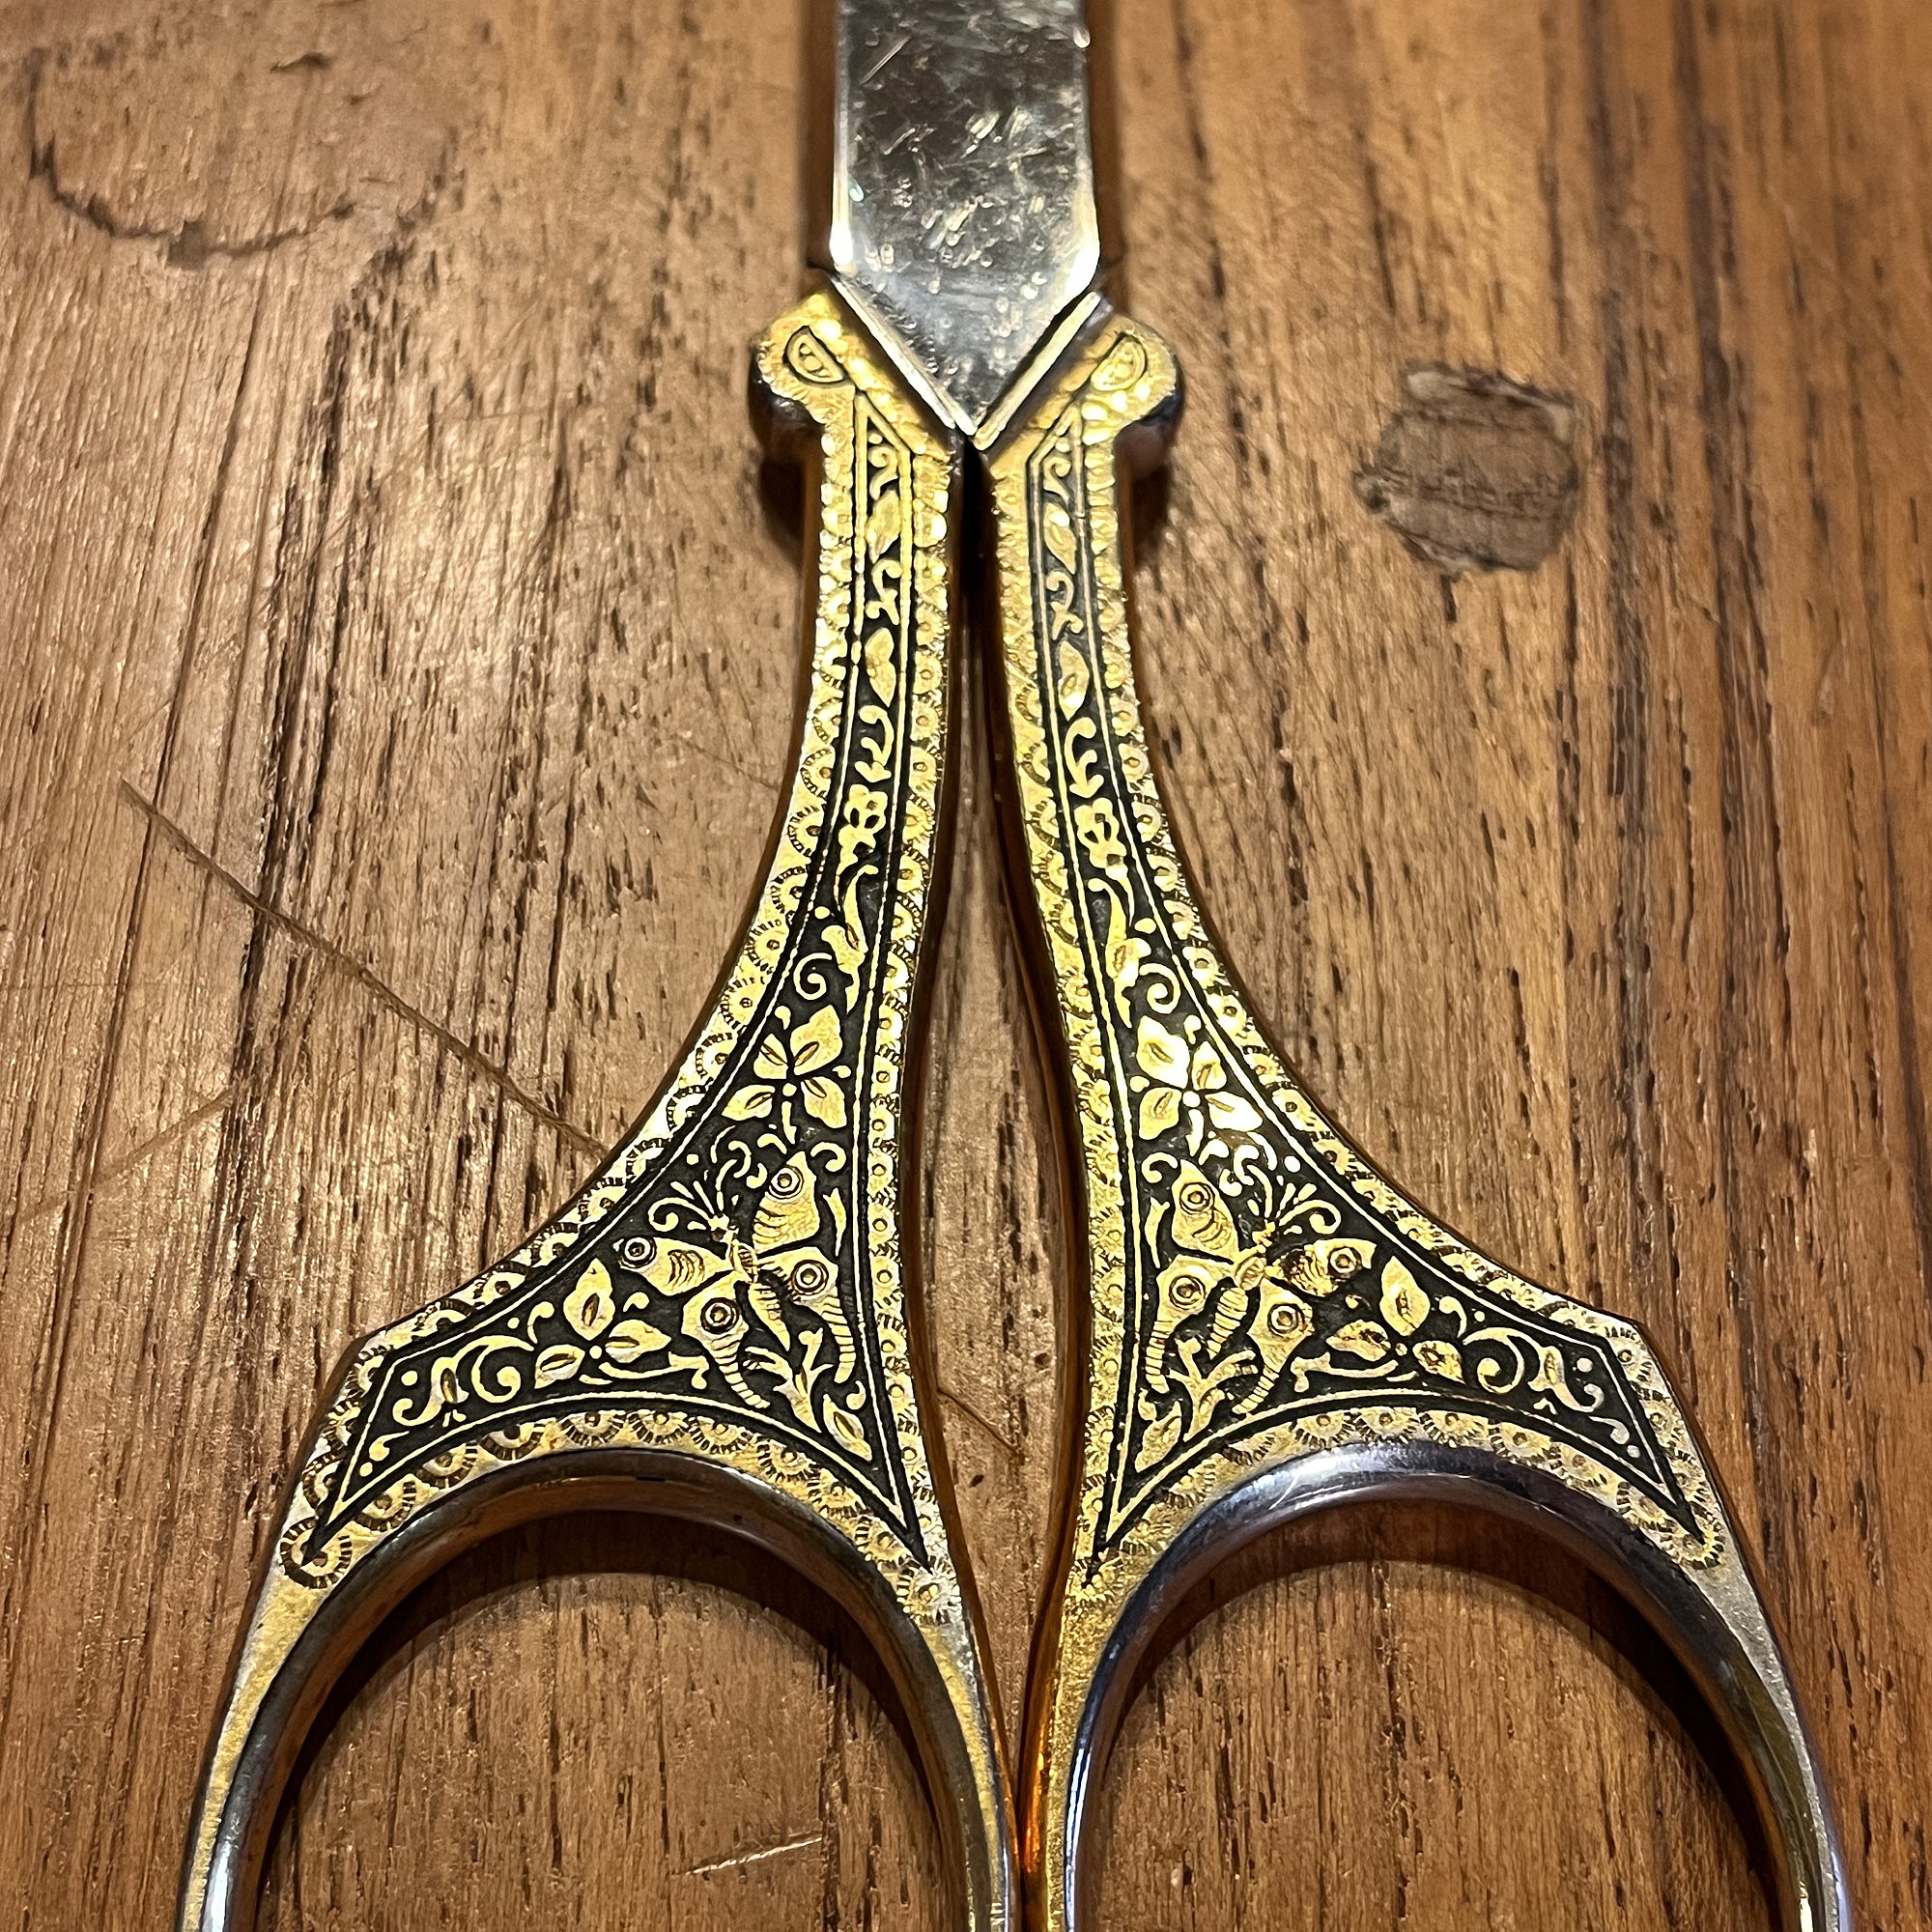 New in the Shop&mdash;This week at greenwitchvintage.com, we're releasing vintage scissors, knives, candle holders, bells, and several other oddball items. All are perfect for a green witch's altar, foraging, wildcrafting, gardening, or just general 